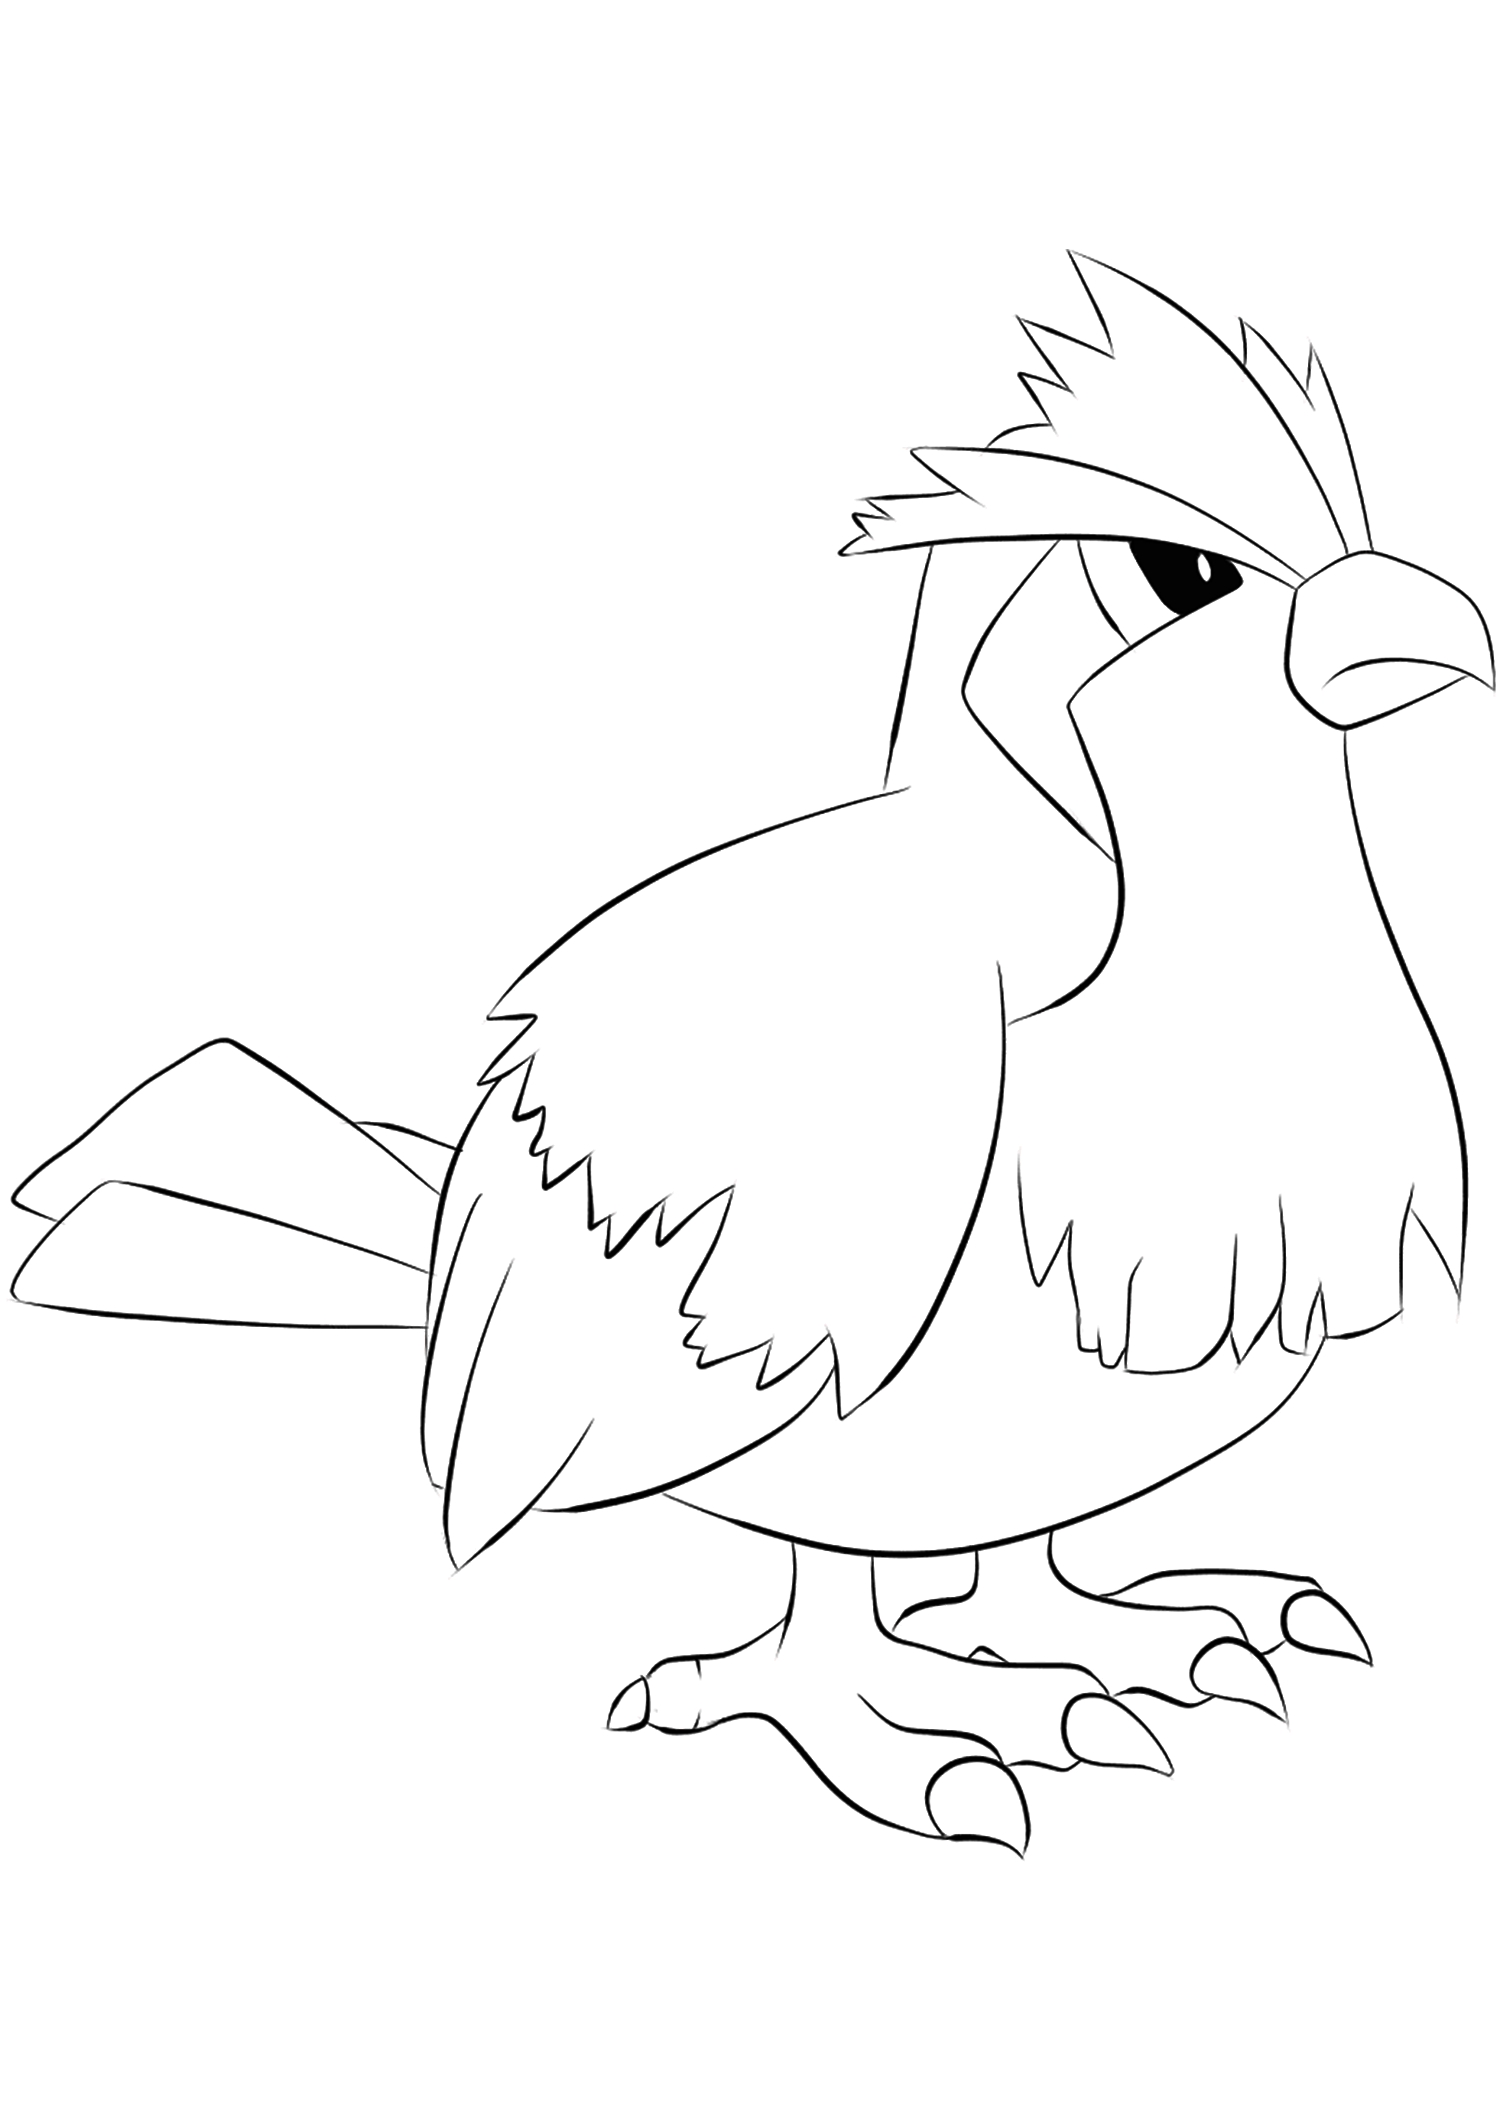 Pidgey (No.16). Pidgey Coloring page, Generation I Pokemon of type Normal and FlyingOriginal image credit: Pokemon linearts by Lilly Gerbil'font-size:smaller;color:gray'>Permission: All rights reserved © Pokemon company and Ken Sugimori.